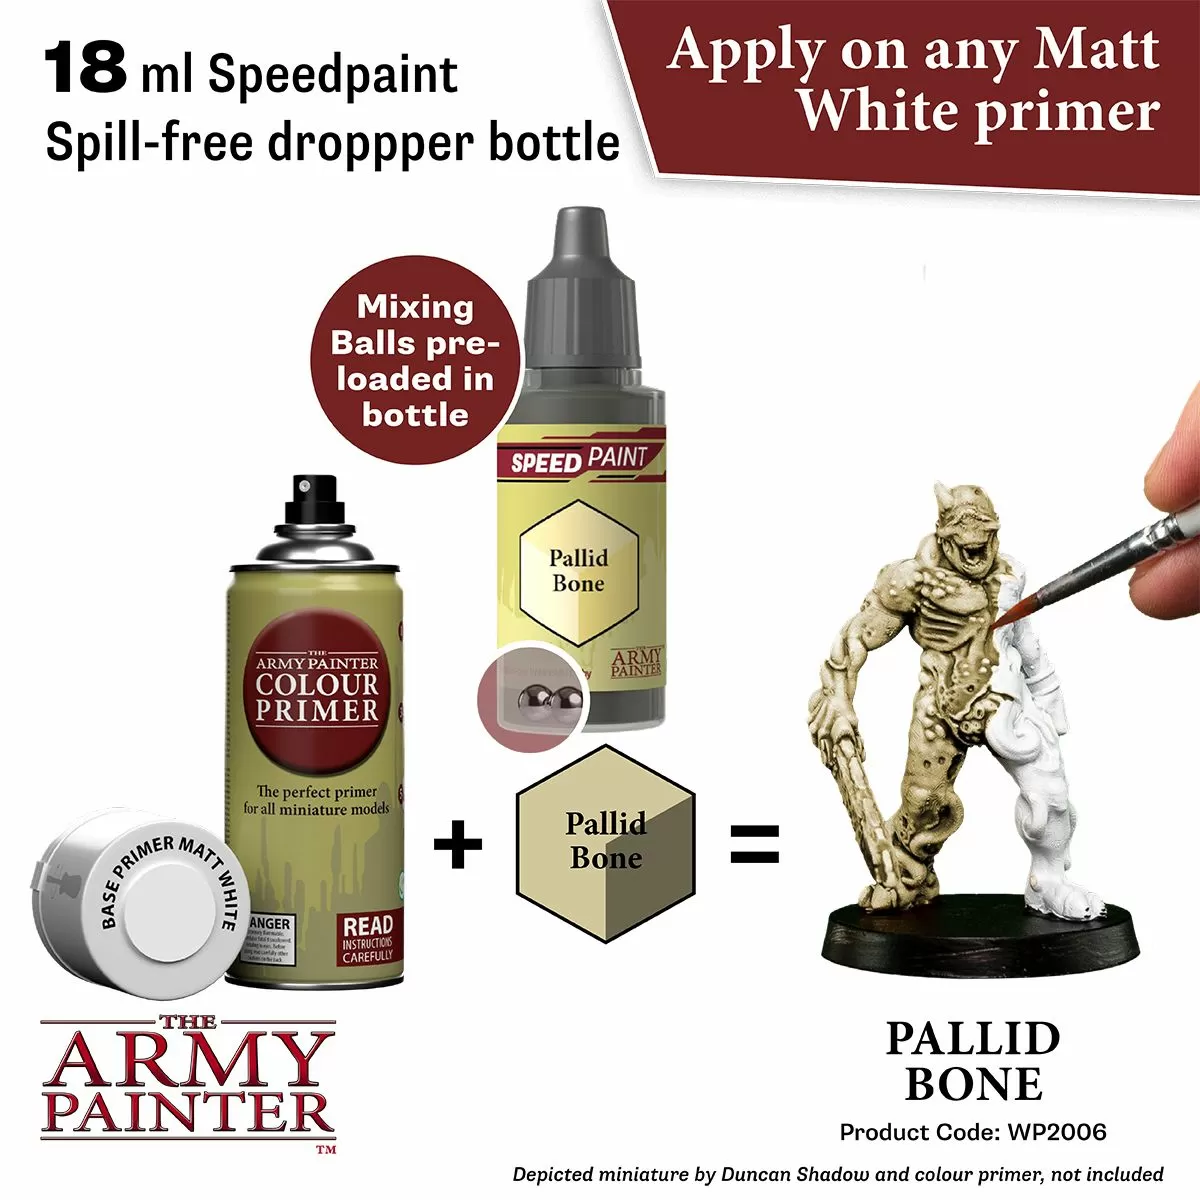 The Army Painter Speedpaint: the new paint sets - Miniatures of Death